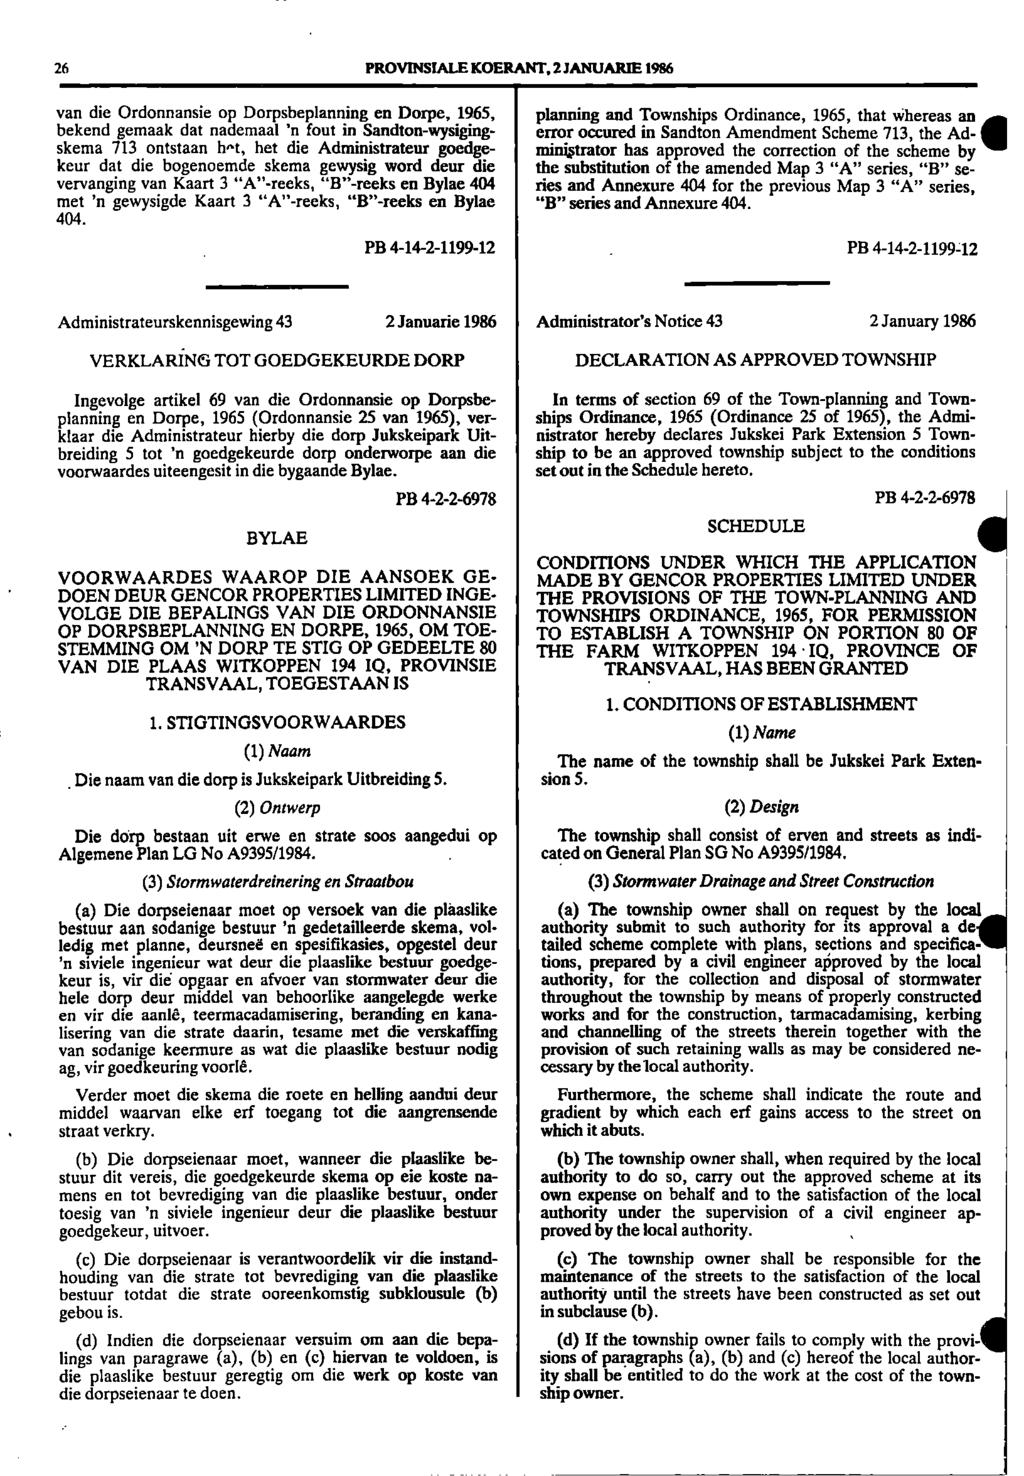 26 PROVINSIALE KOERANT, 2 JANUARIE 1986 planning and Townships Ordinance, 1965, that whereas an error occured in Sandton Amendment Scheme 713, the Ad- minigrator has approved the correction of the